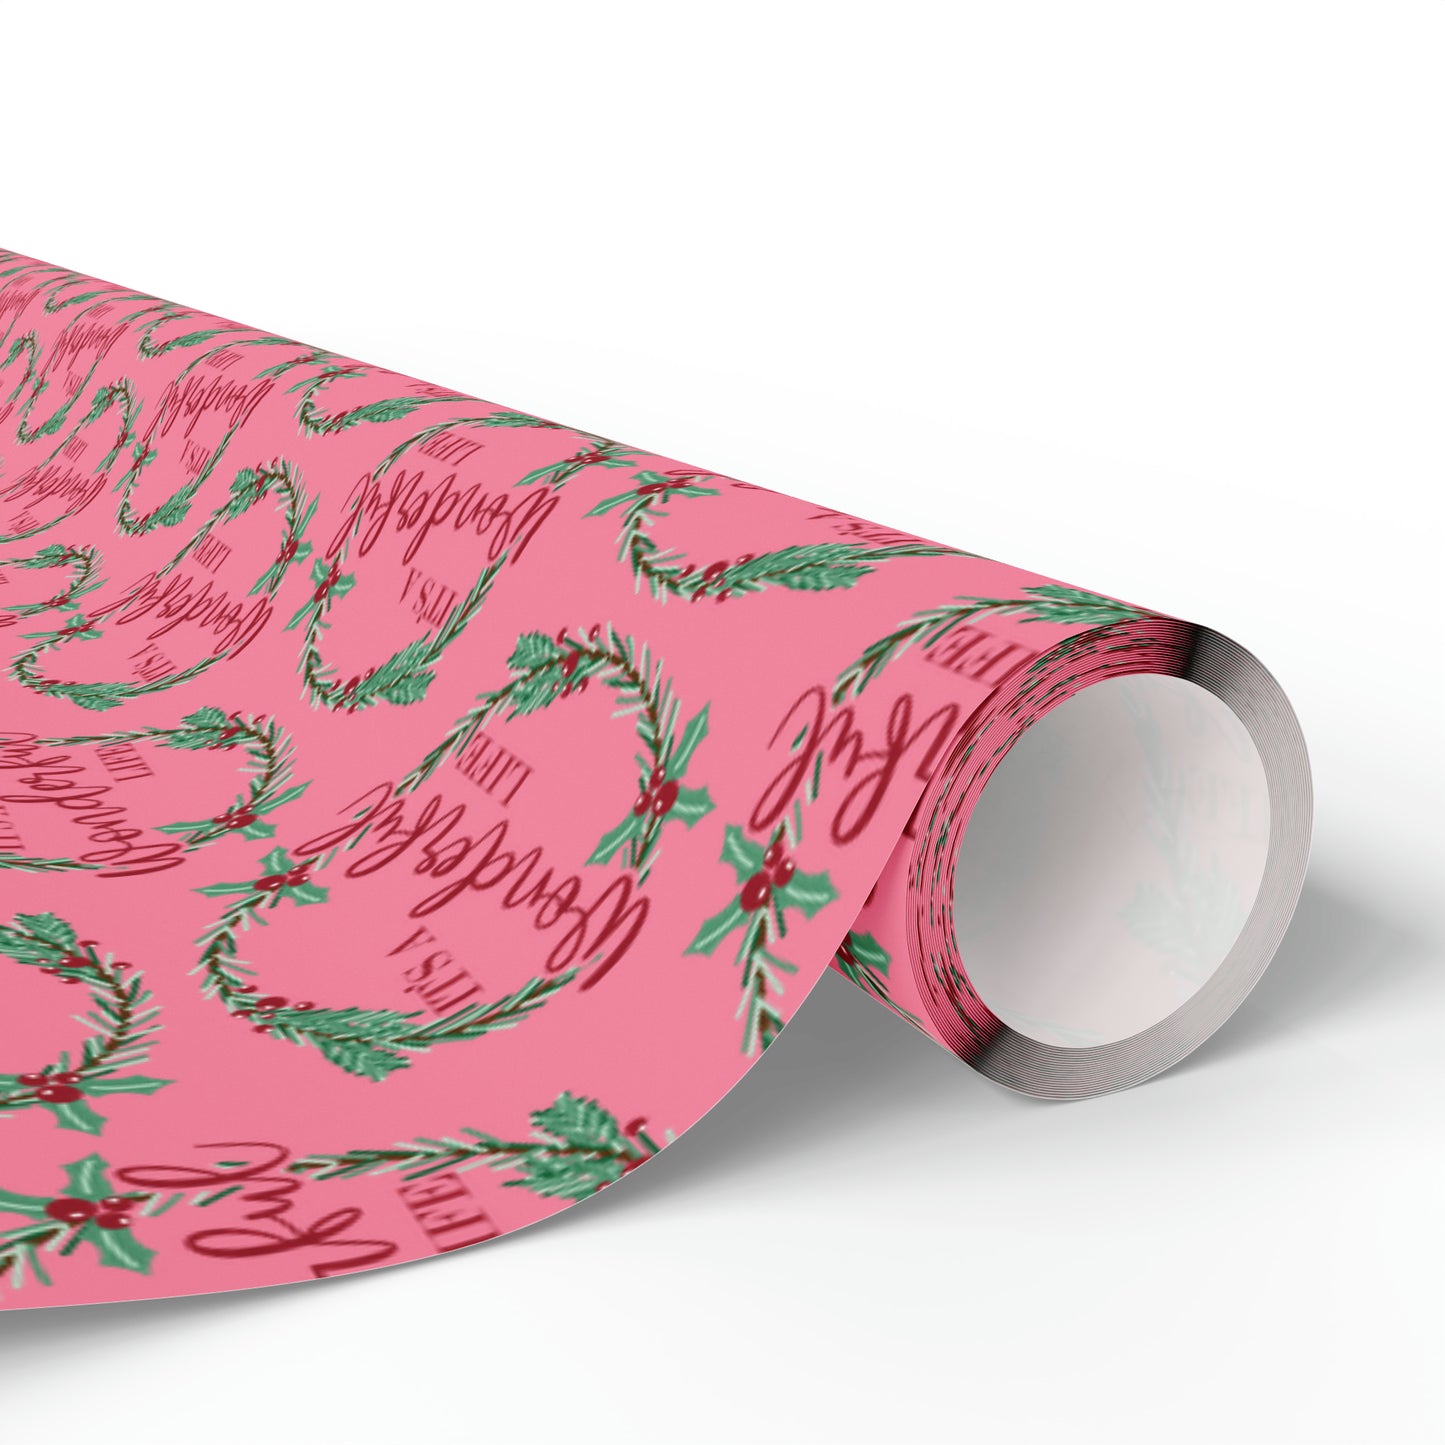 It's A Wonderful Life Christmas Wreath Pink Retro Style Holiday Gift Wrap Paper - Glossy Or Matte